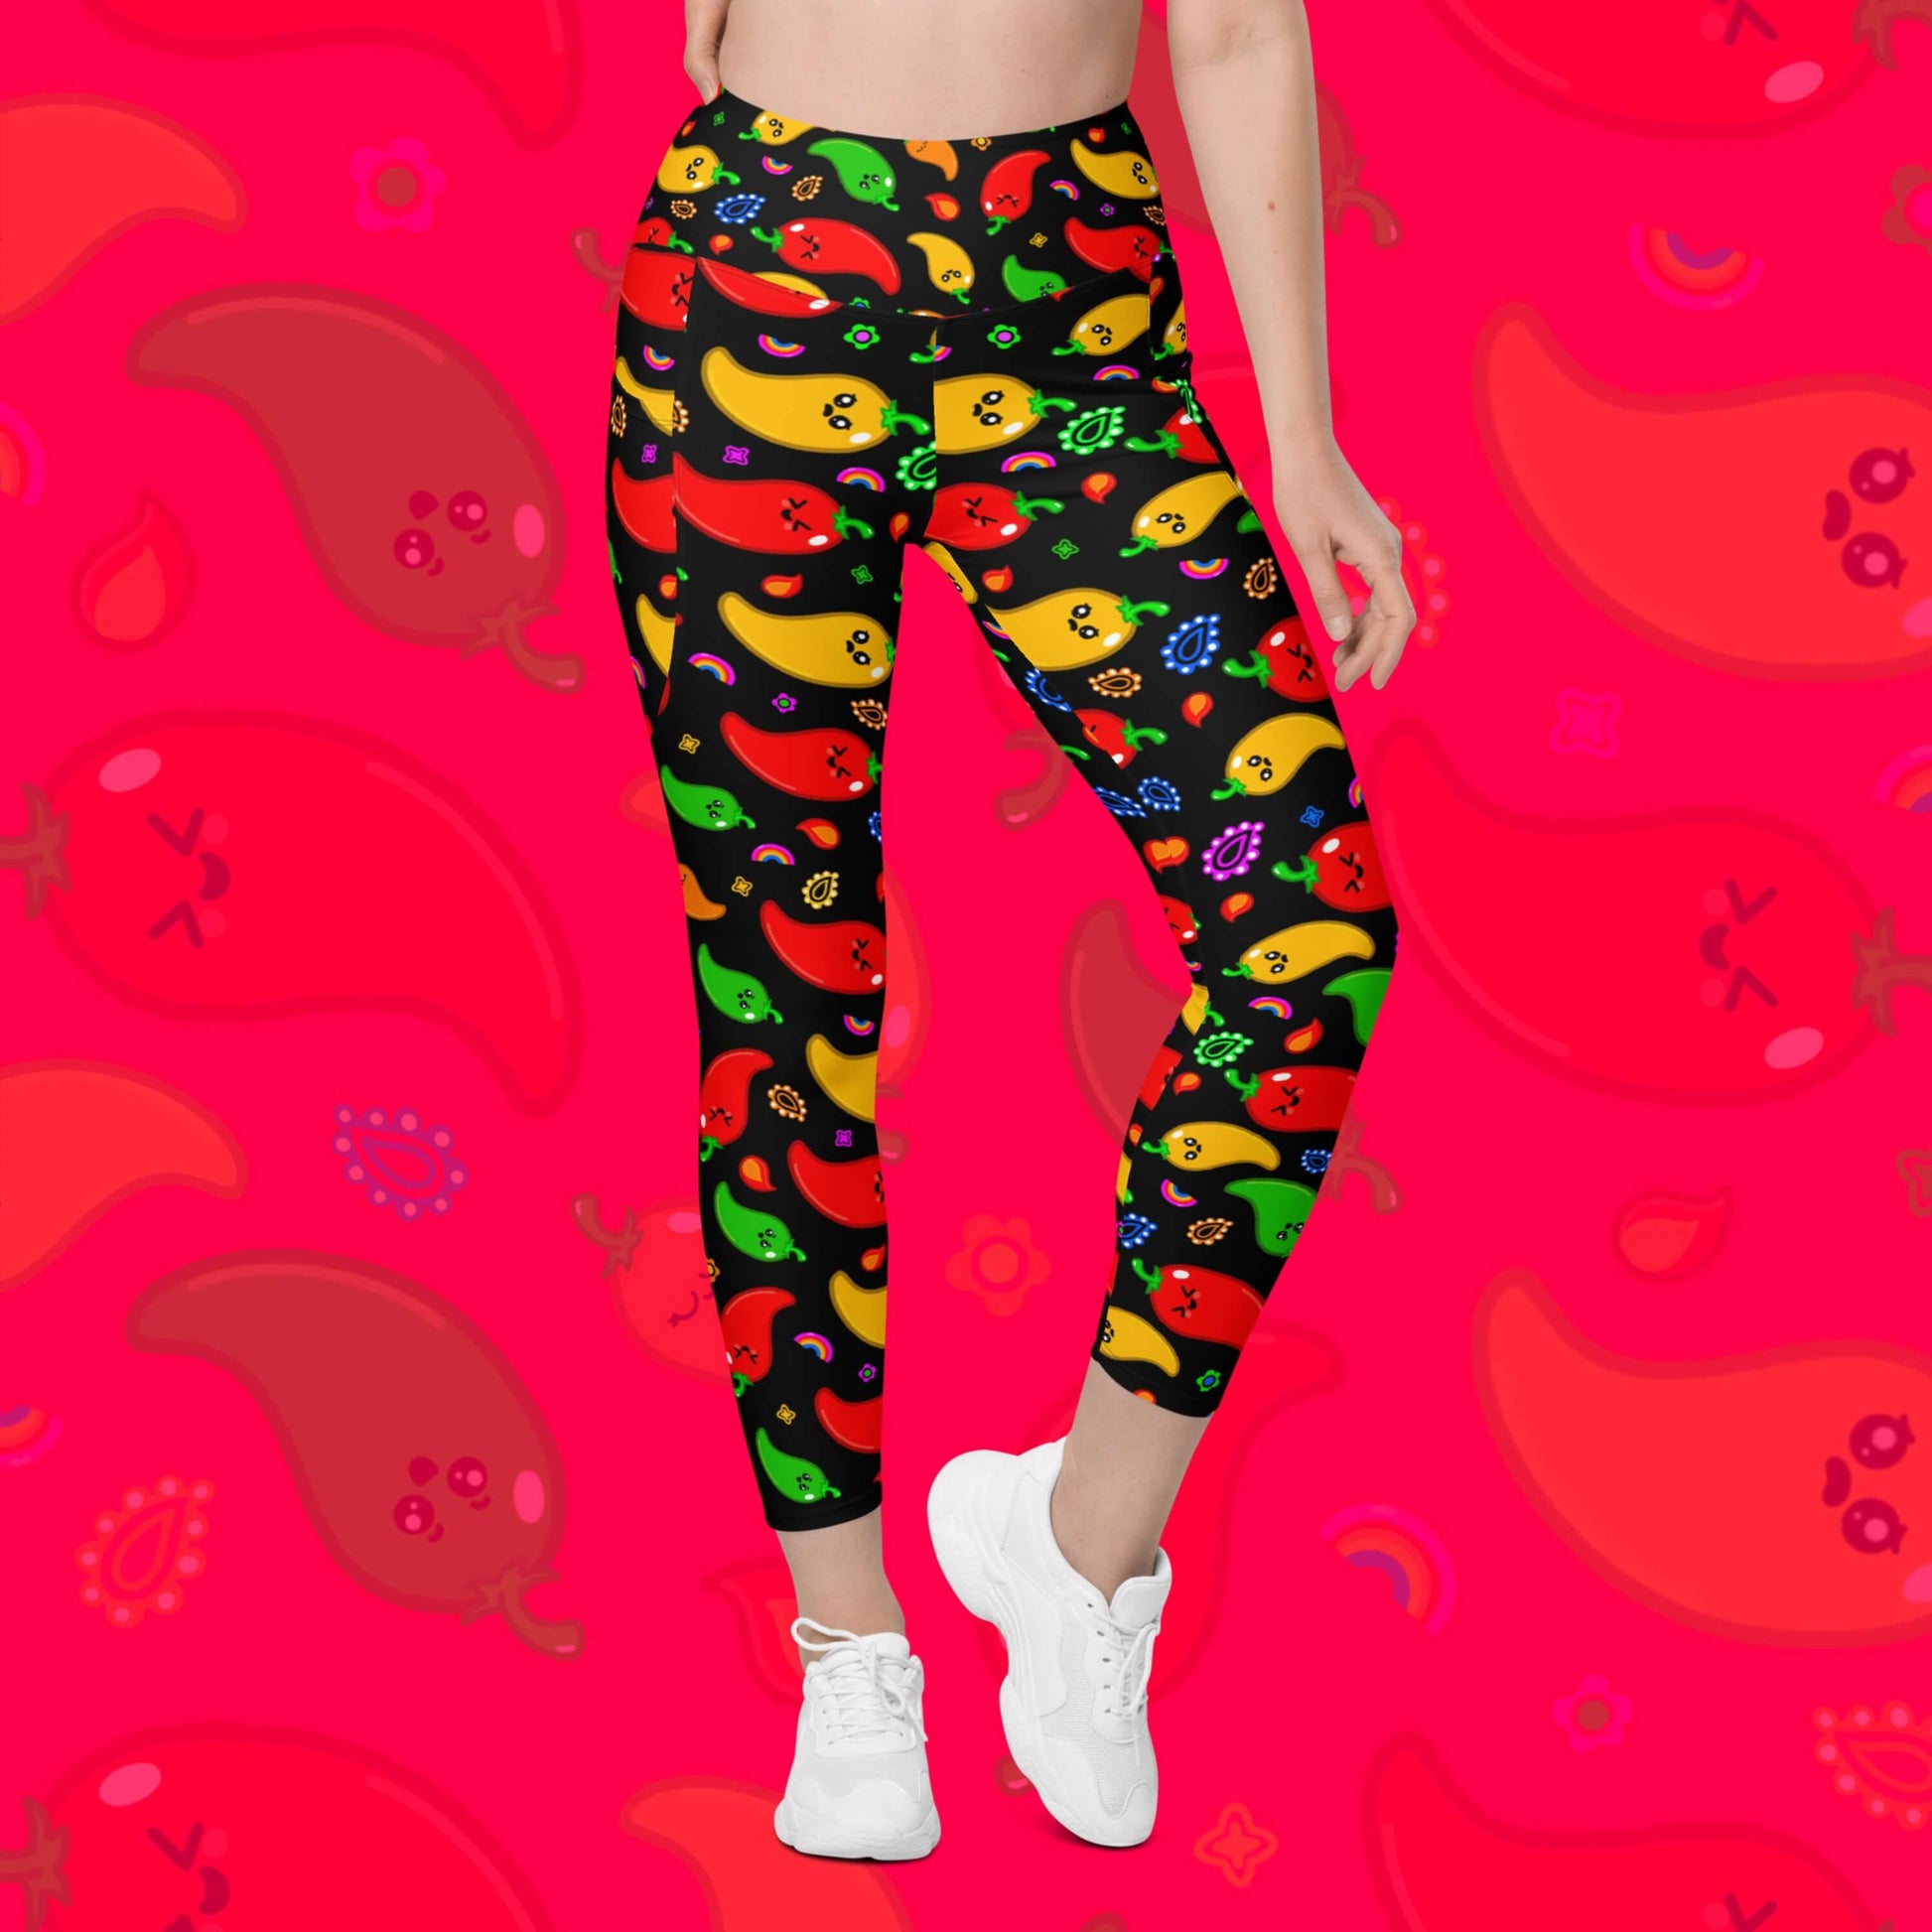 Black leggings with pockets with red, green, orange and yellow chilli peppers with cute faces on and various cute doodles around them shown on a model who has one leg bent and the other straight. The background of the photo is a faded close up of the print. The hand drawn design is raising awareness for neurodiversity. 